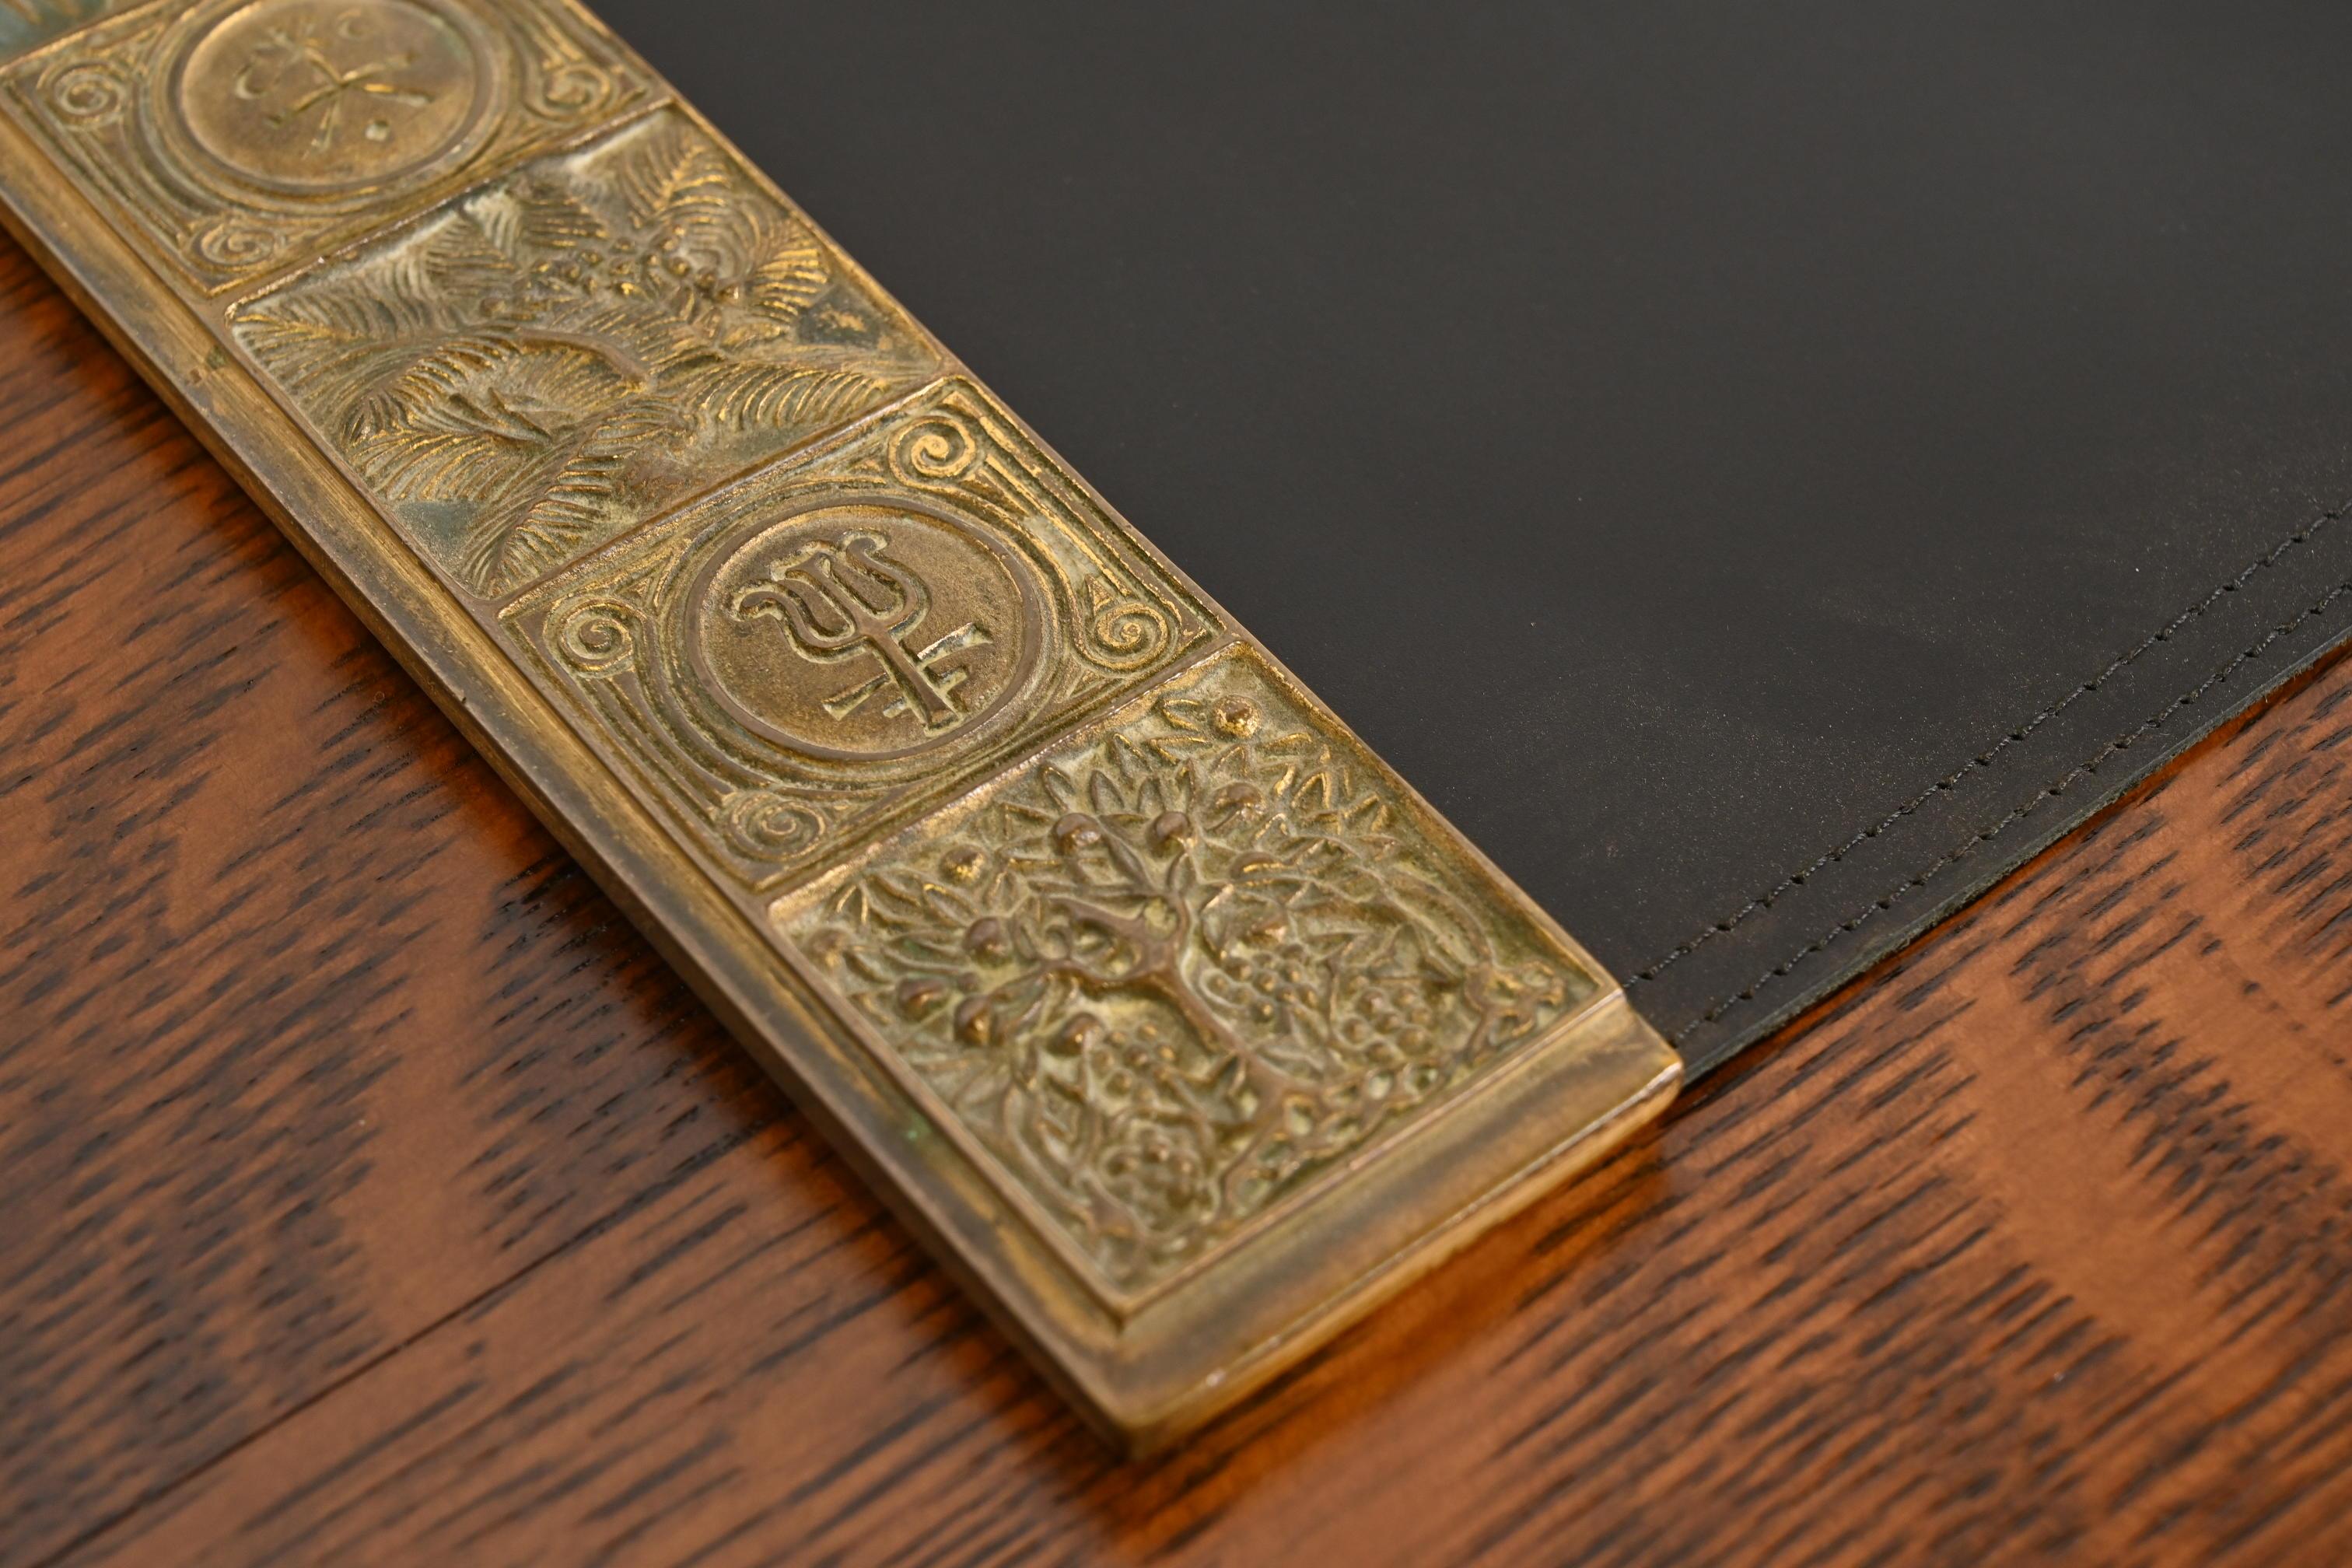 Tiffany Studios New York Bookmark Bronze Doré Blotter Ends With Leather Blotter In Good Condition For Sale In South Bend, IN